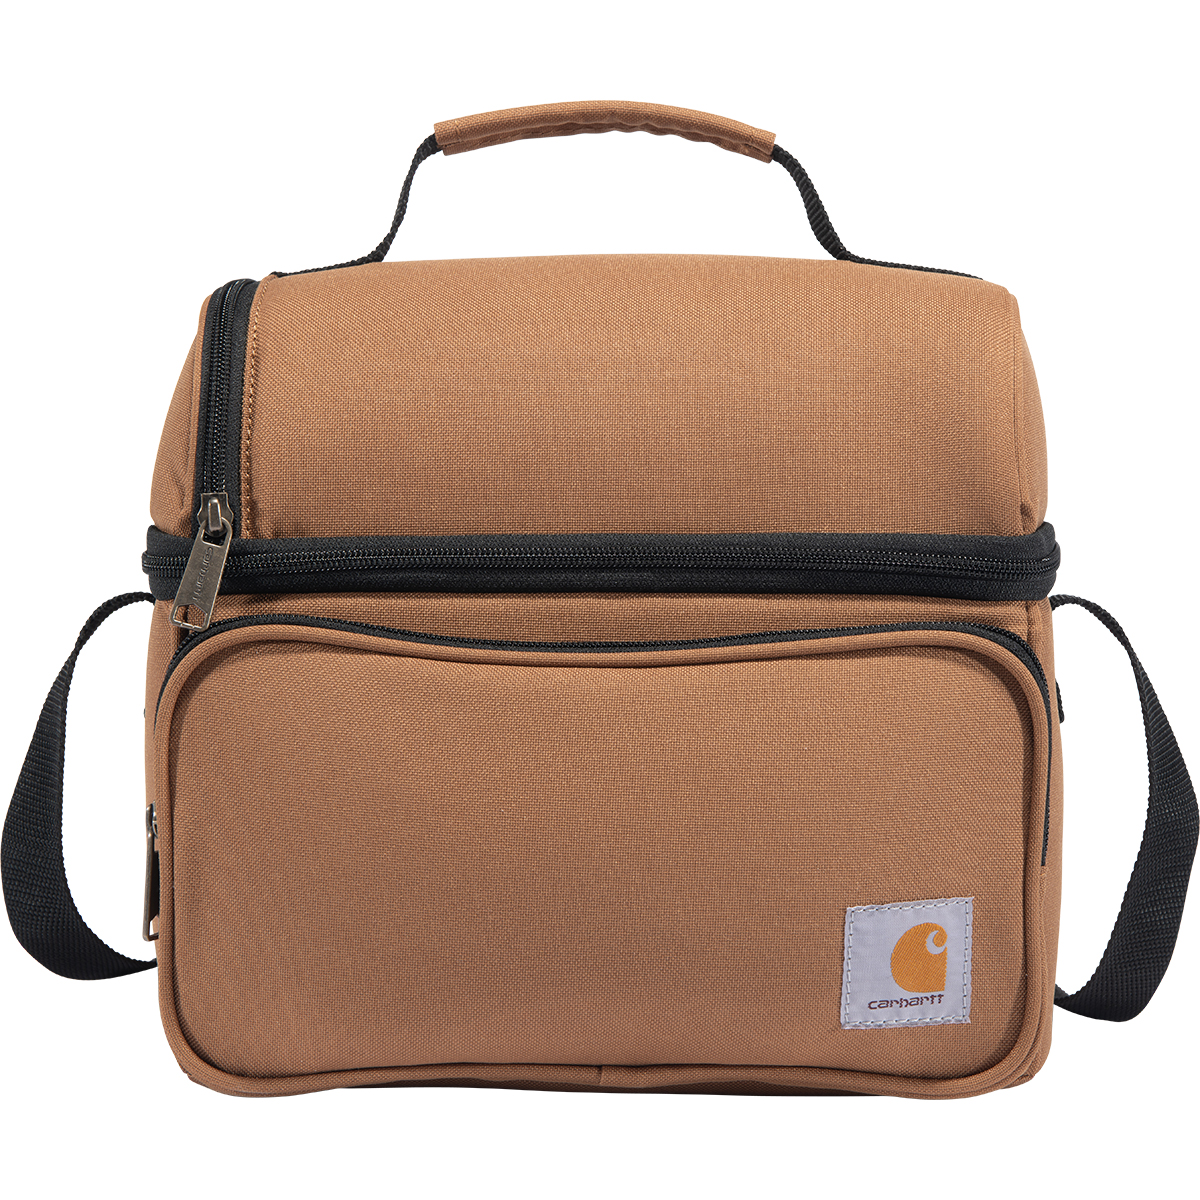 Carhartt Insulated 12-Can 2-Compartment Lunch Cooler, Brown